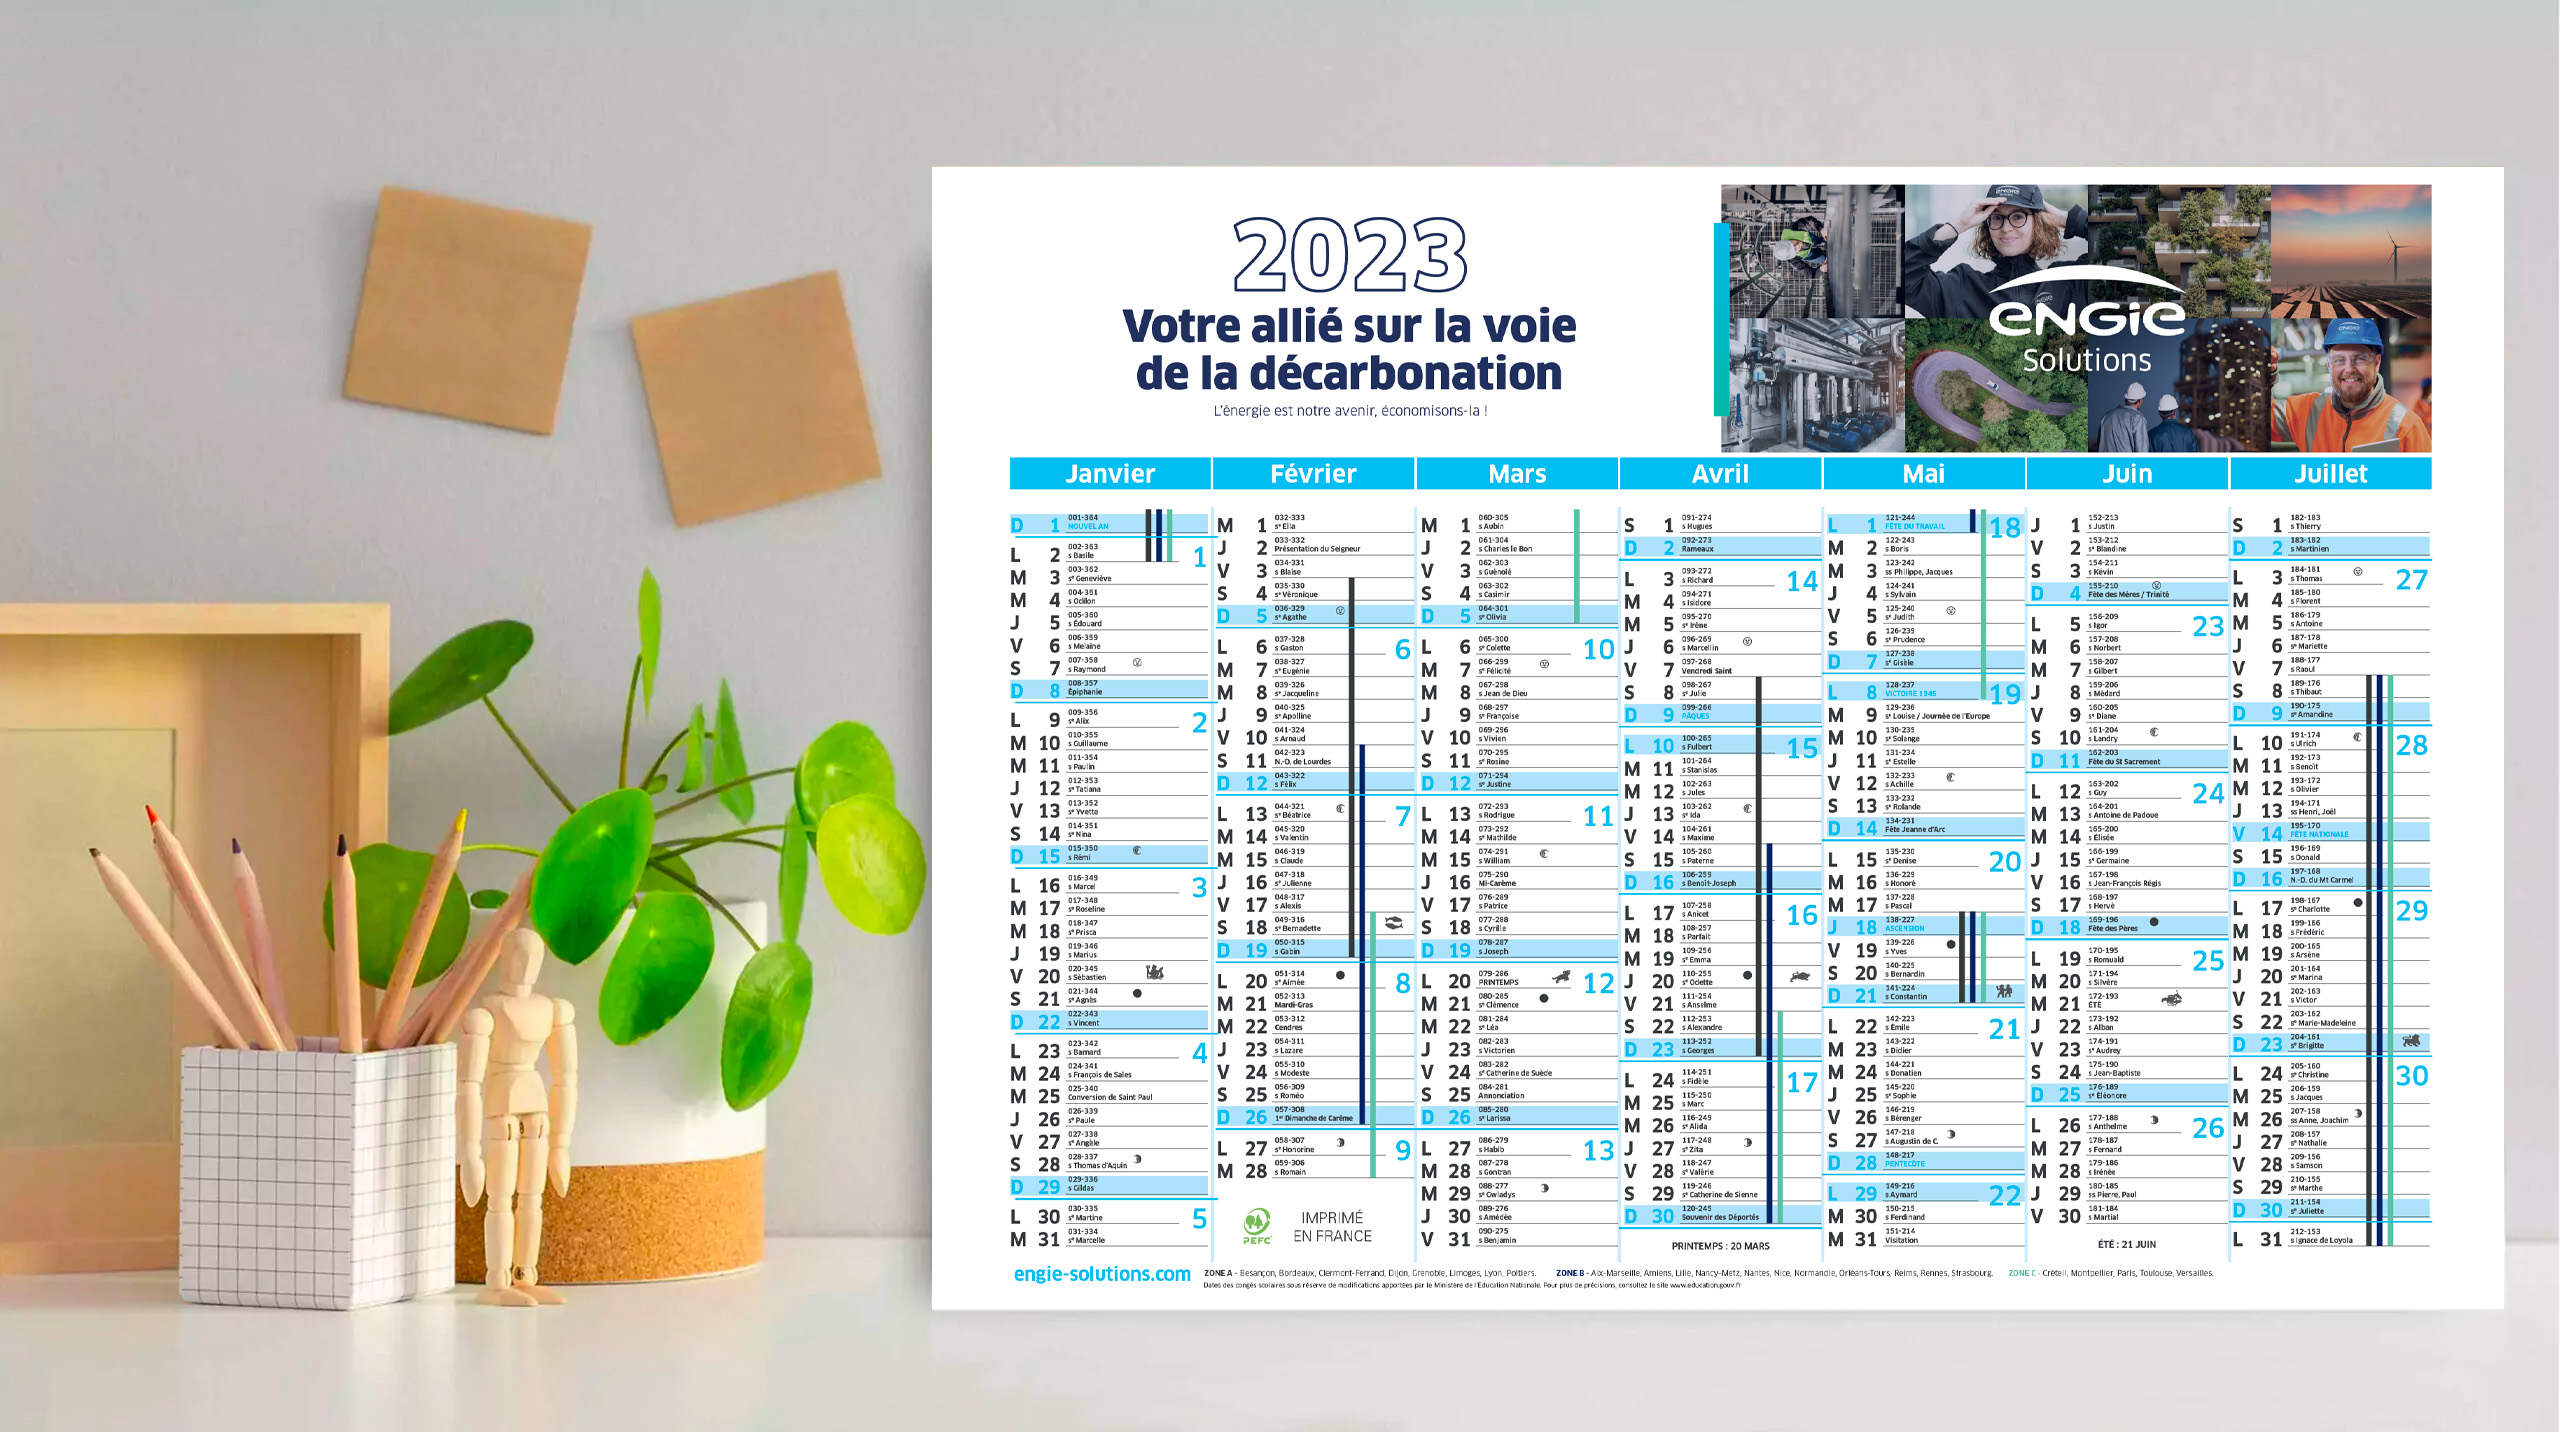 Engie - Calendrier 2023